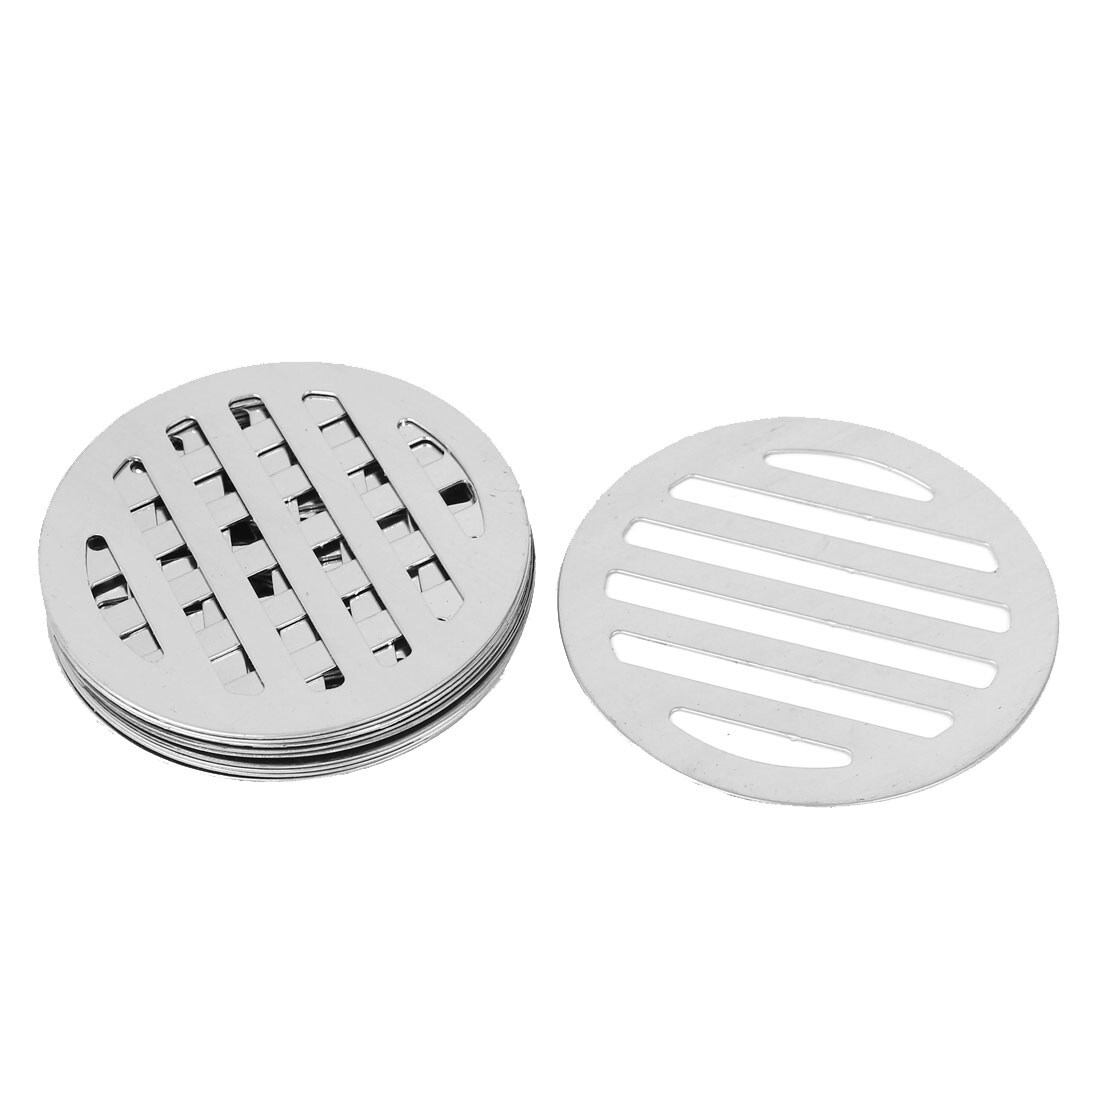 https://ak1.ostkcdn.com/images/products/is/images/direct/f8b6e89224a64b4c7dccf725e134378fa5780ce3/Stainless-Steel-Round-Sink-Floor-Drain-Strainer-Cover-3-Inch-Dia-10pcs.jpg